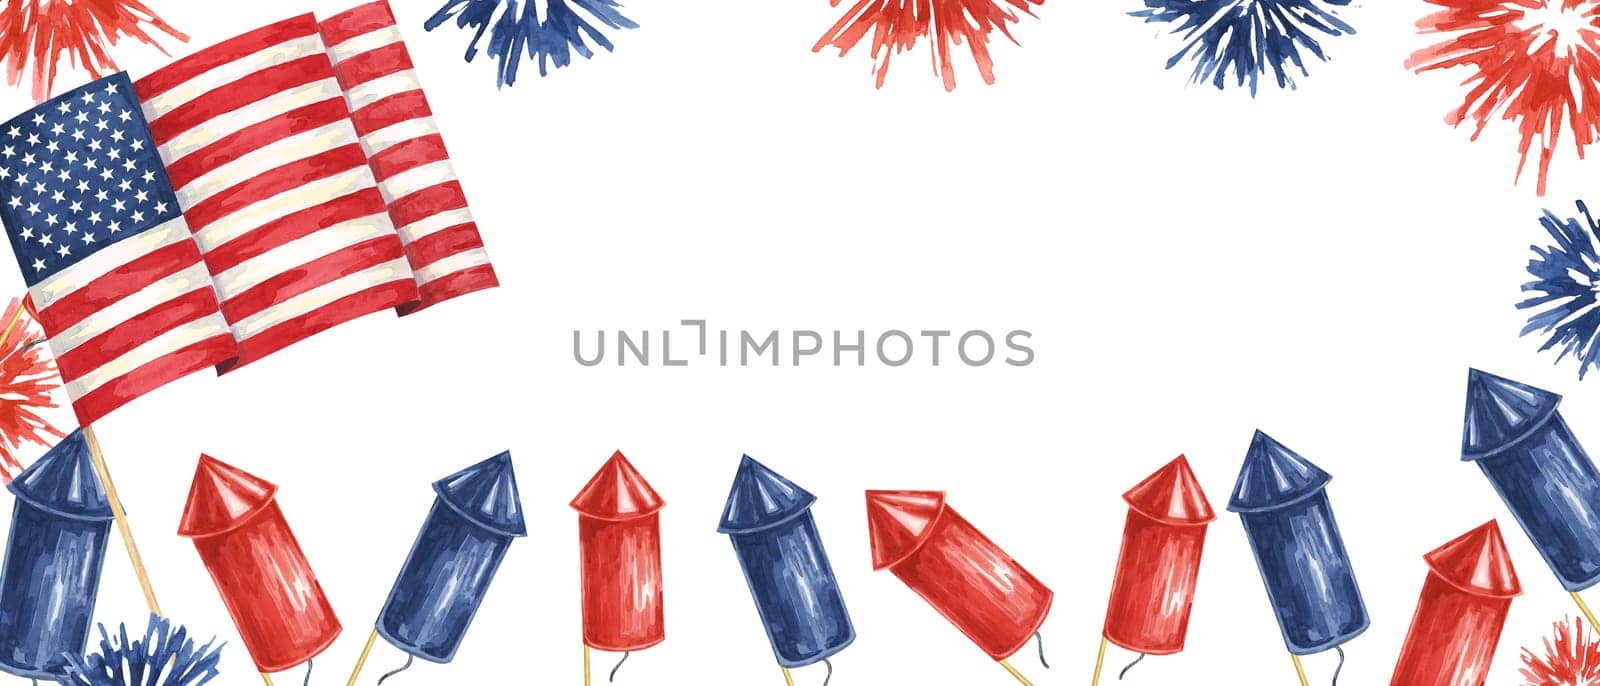 Fourth of July banner. USA flag, firecrackers and fireworks bursts. Independence day national holiday template. Hand drawn watercolor 4th of July clipart for web, voucher, banner, coupon, sale, store